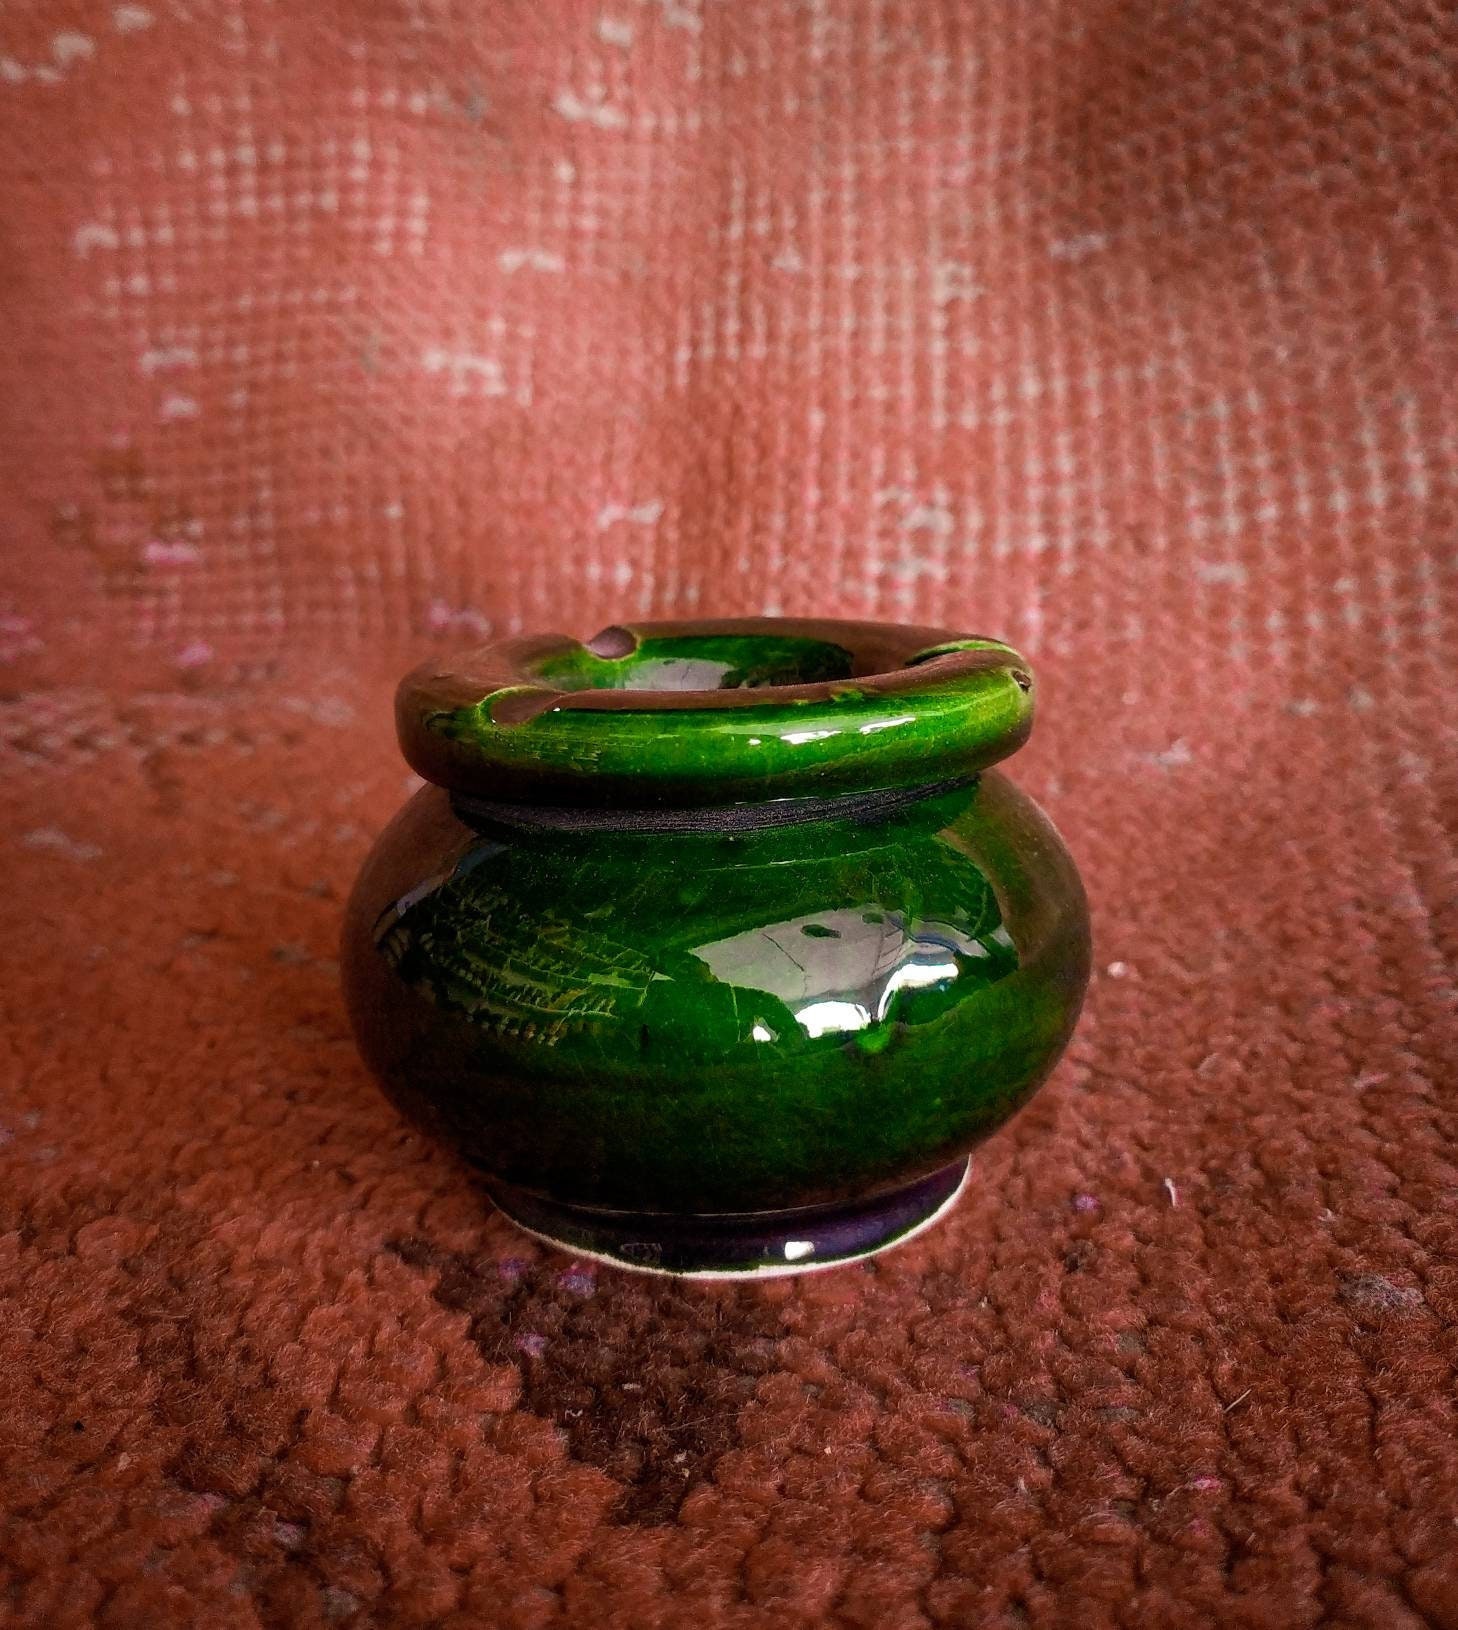 2 in 1 Ashtray and Candlestick holders Moroccan Ceramic Handmade